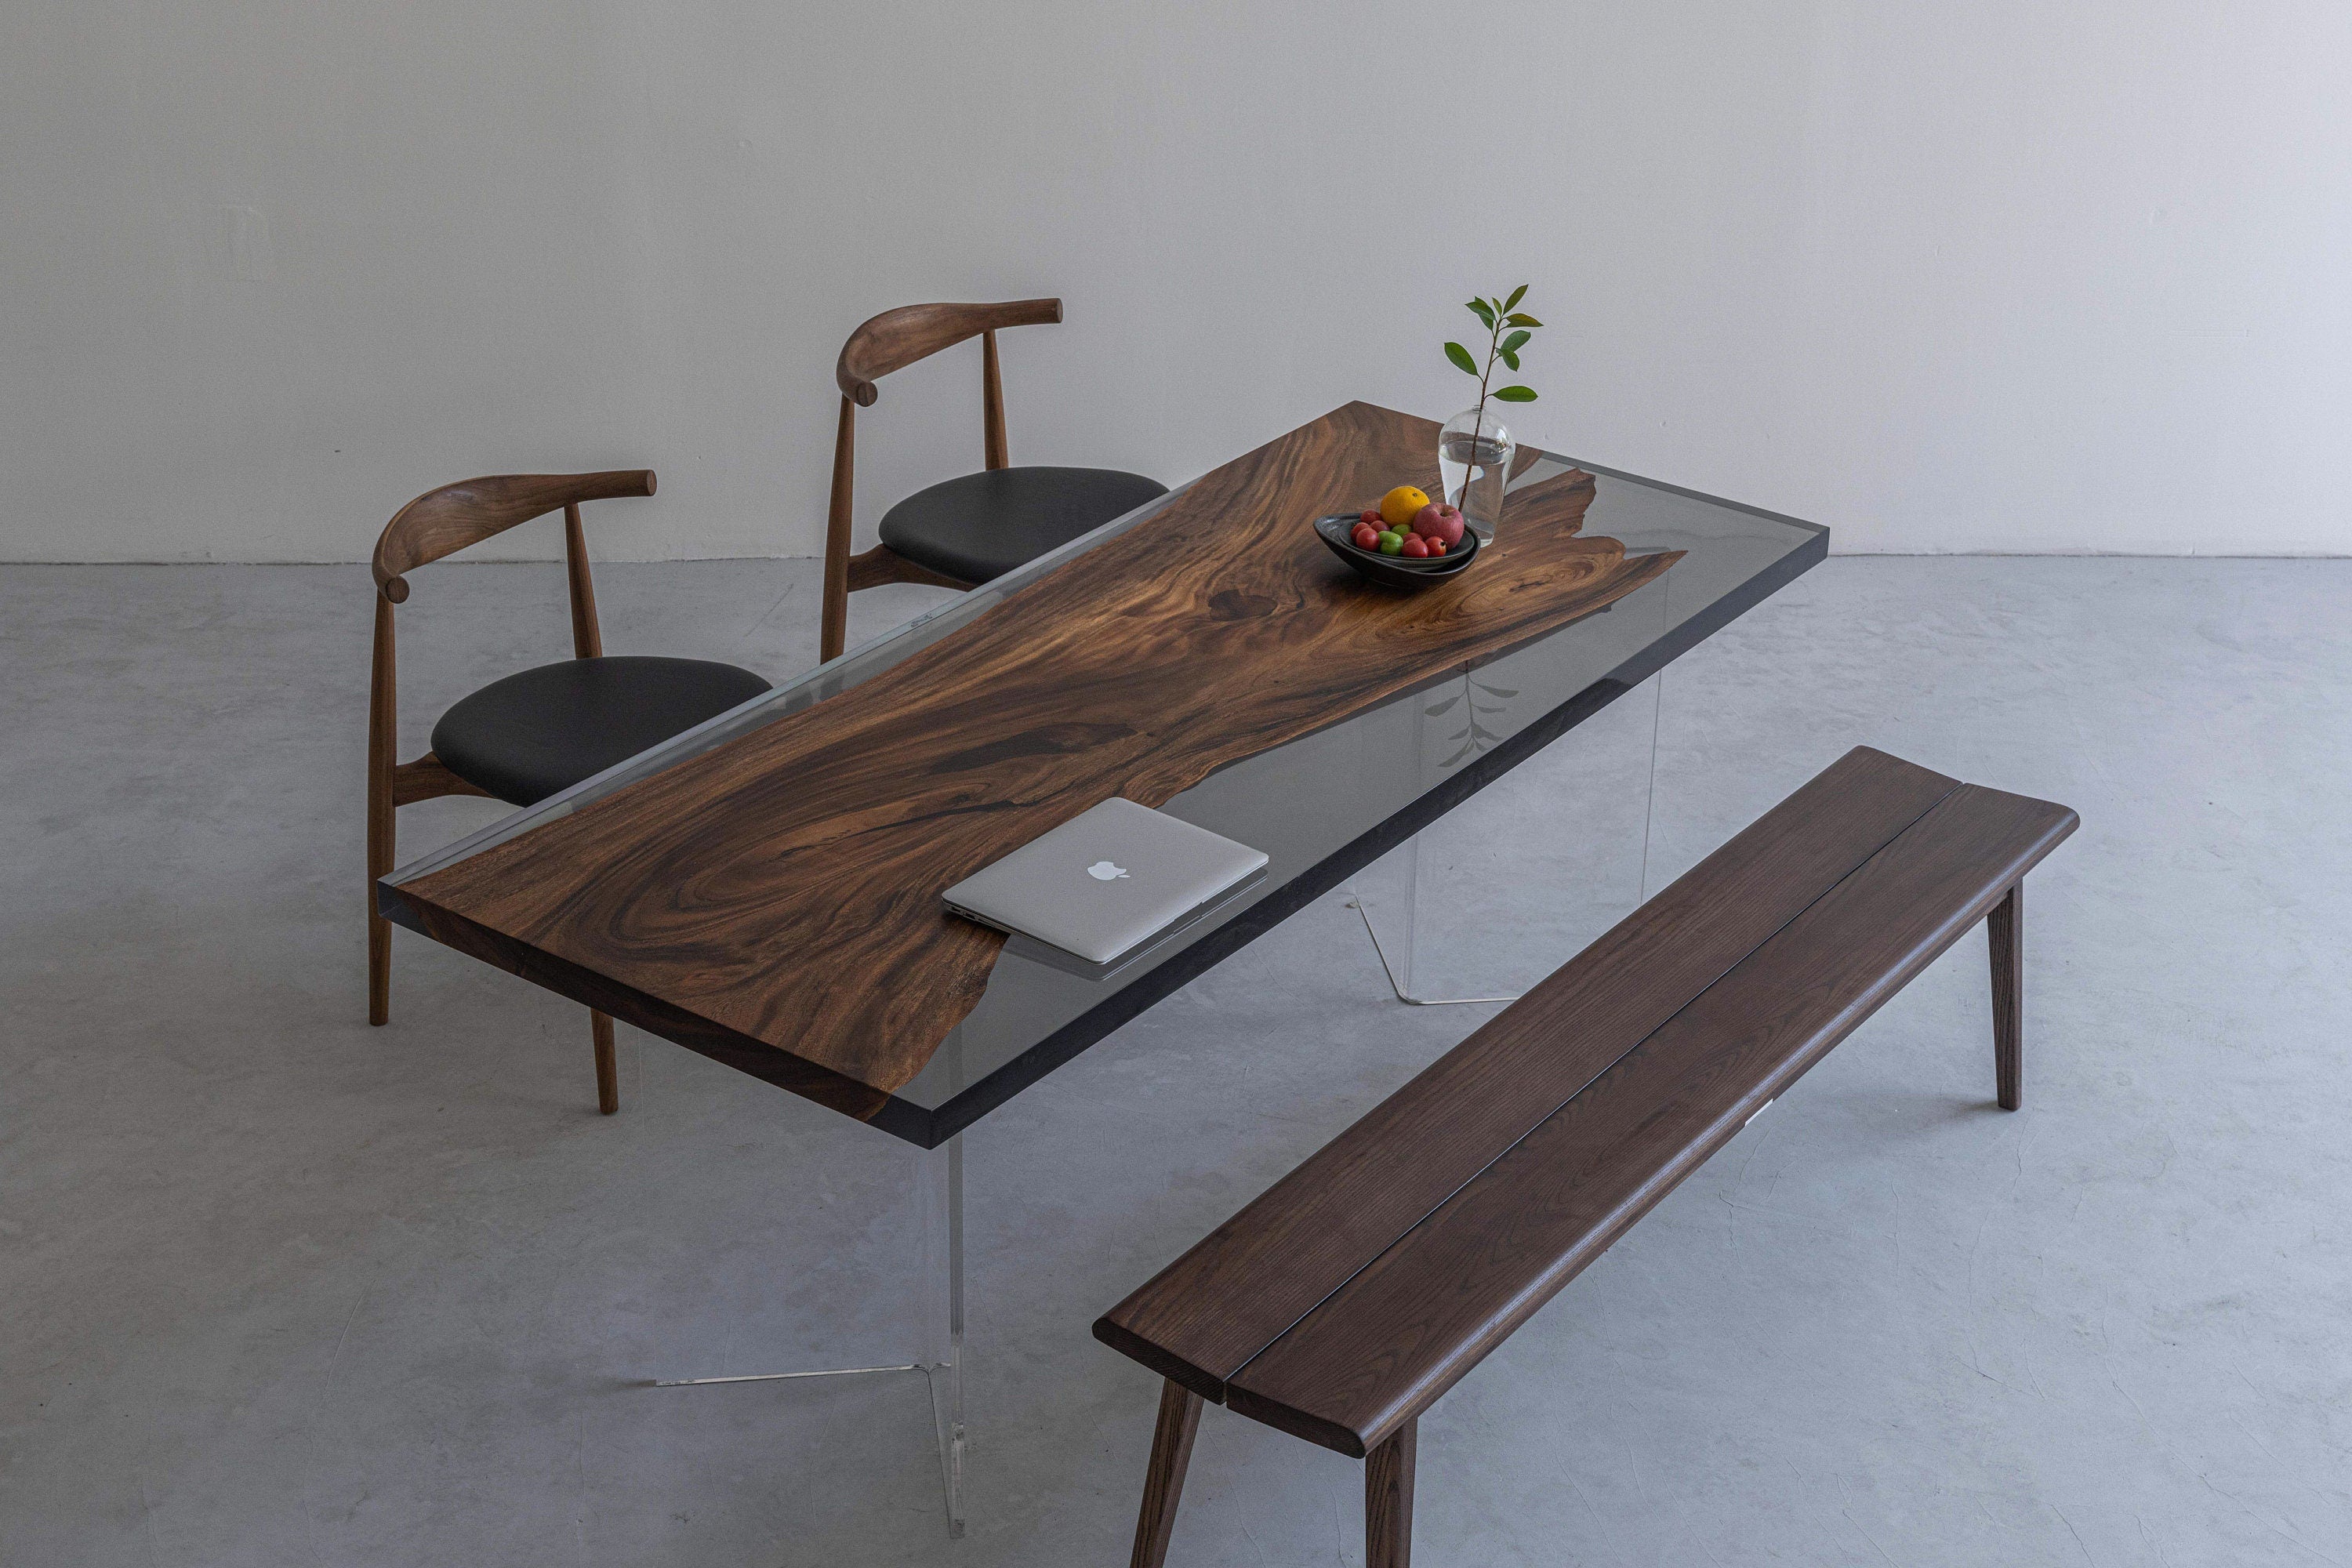 new modern table, epoxy table, epoxy resin table, River table,not olive wood, epoxy desk